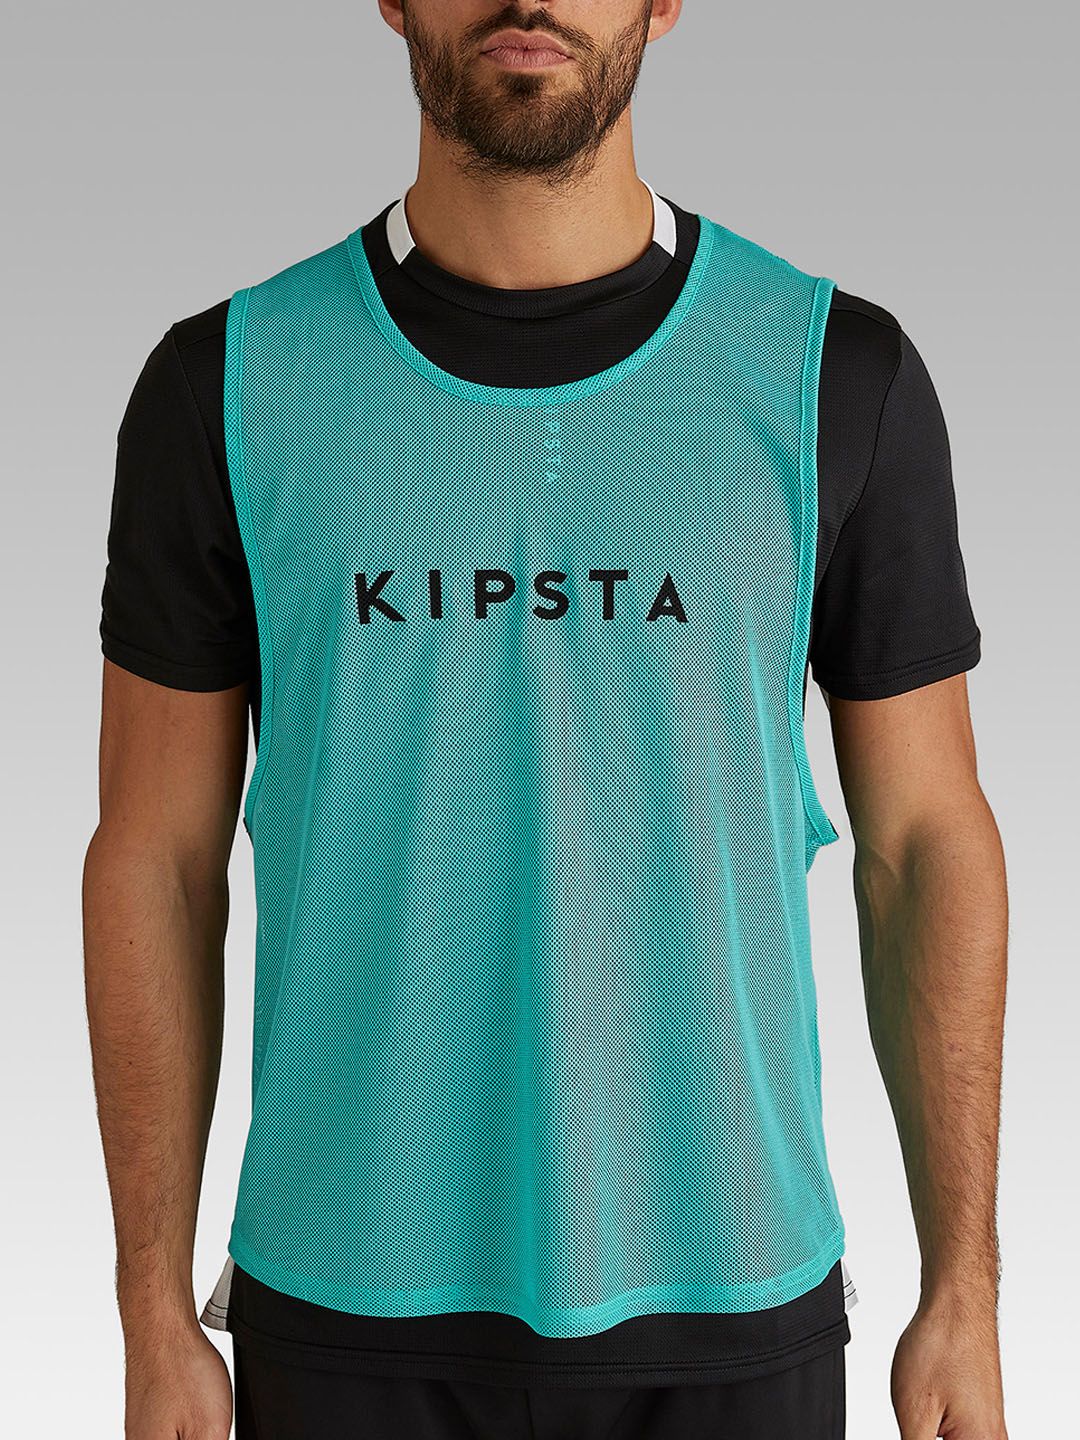 Kipsta By Decathlon Unisex Turquoise Blue Printed Round Neck T-shirt Price in India